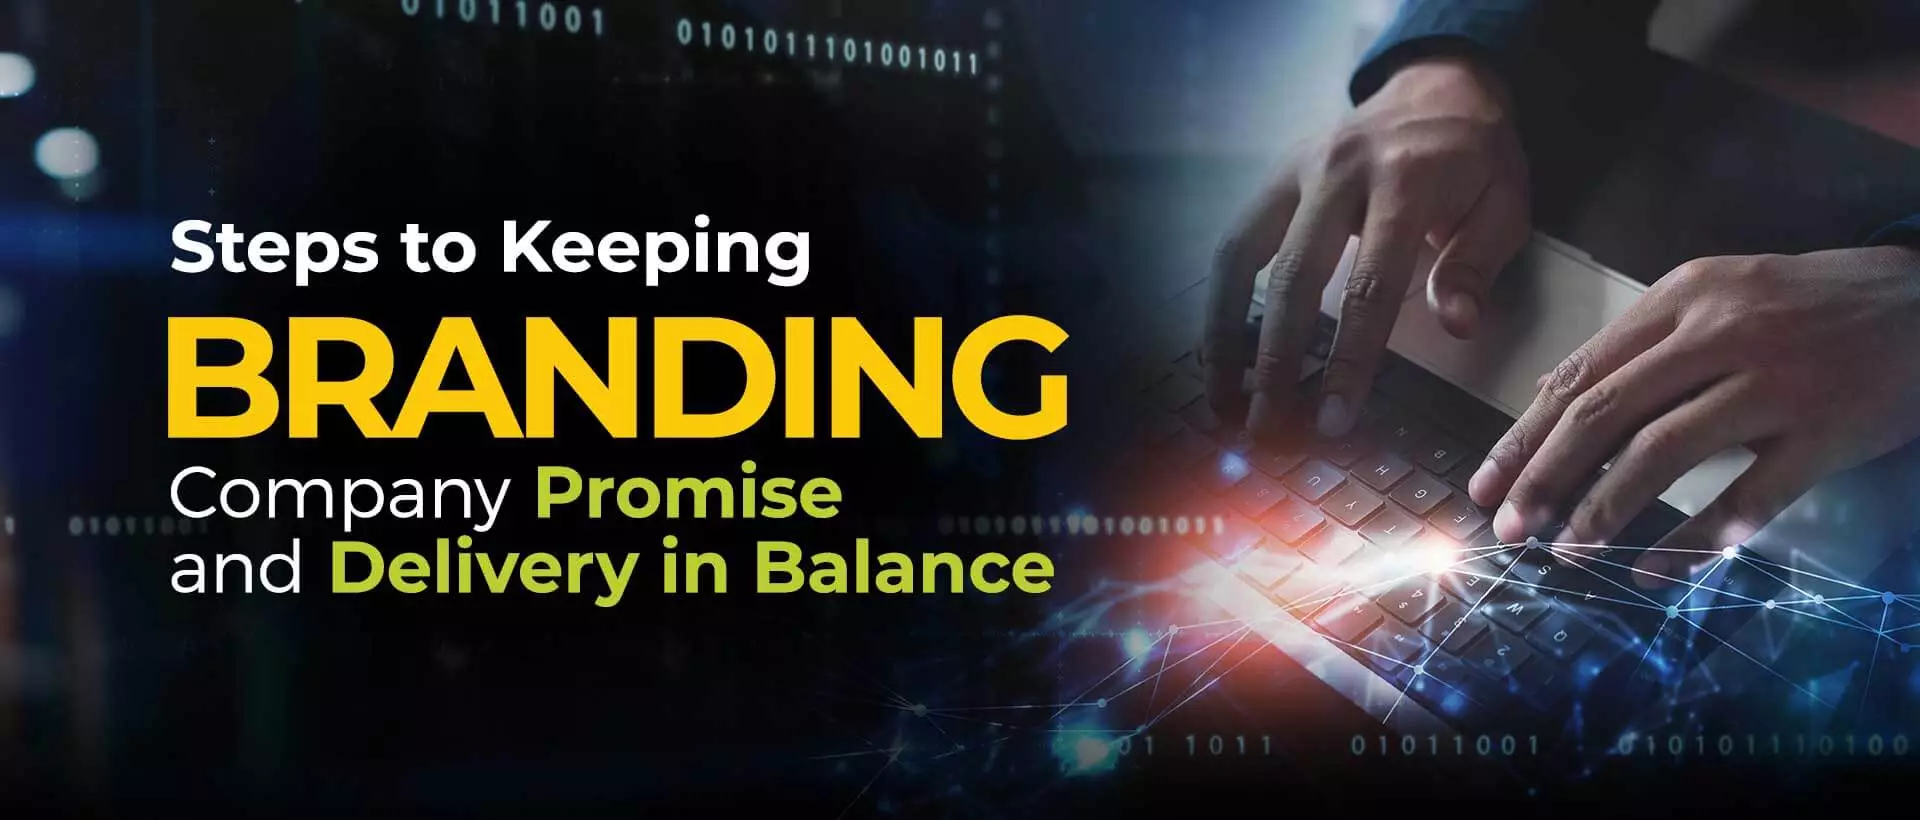 Steps to Keeping Branding Company Promise and Delivery in Balance